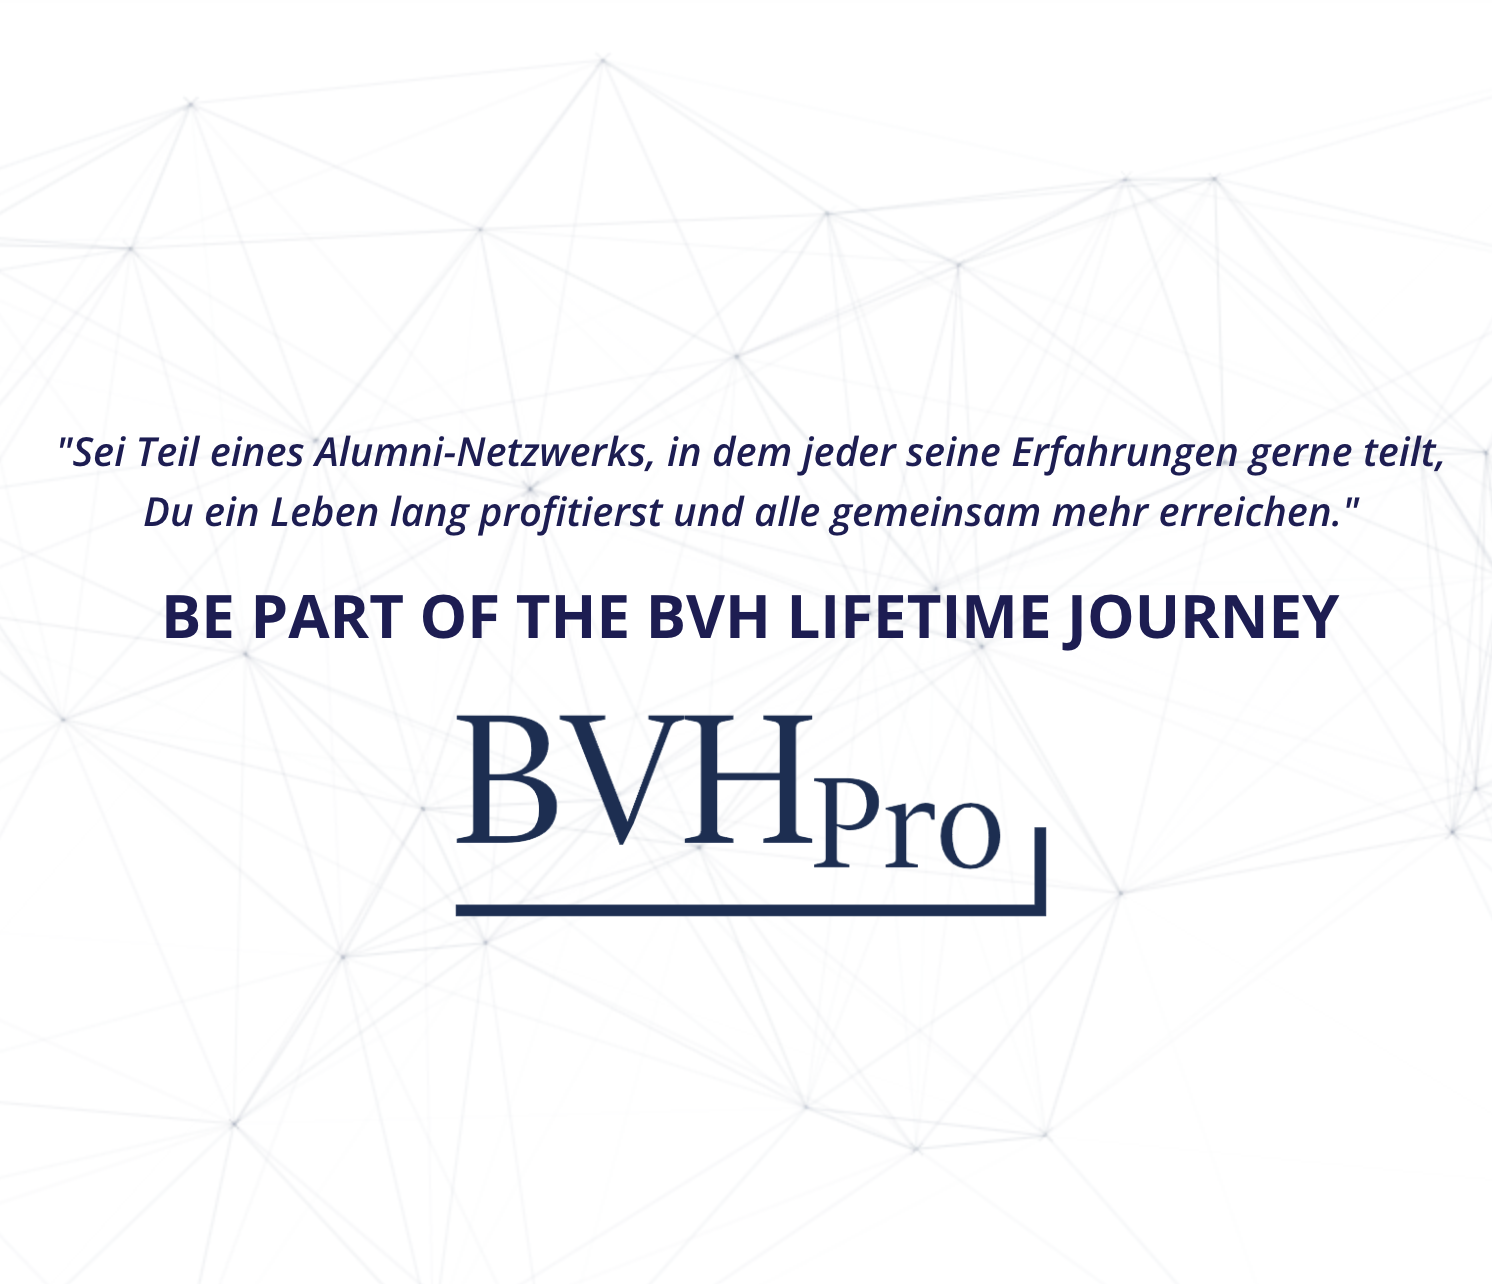 Co-CEO & Co-Founder, BVHPro